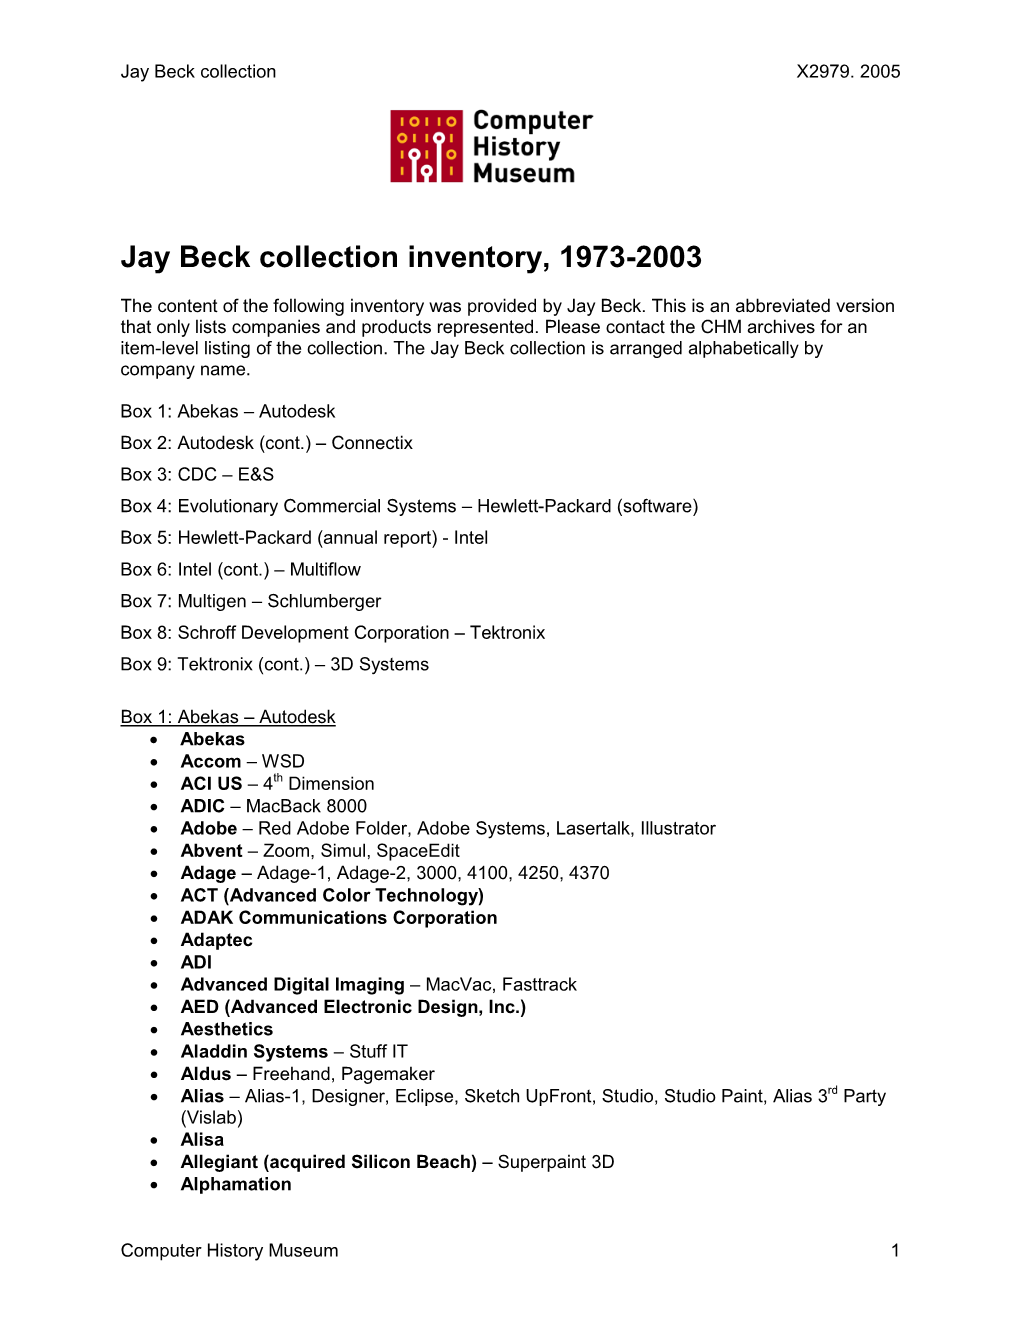 Jay Beck Collection Inventory, 1973-2003